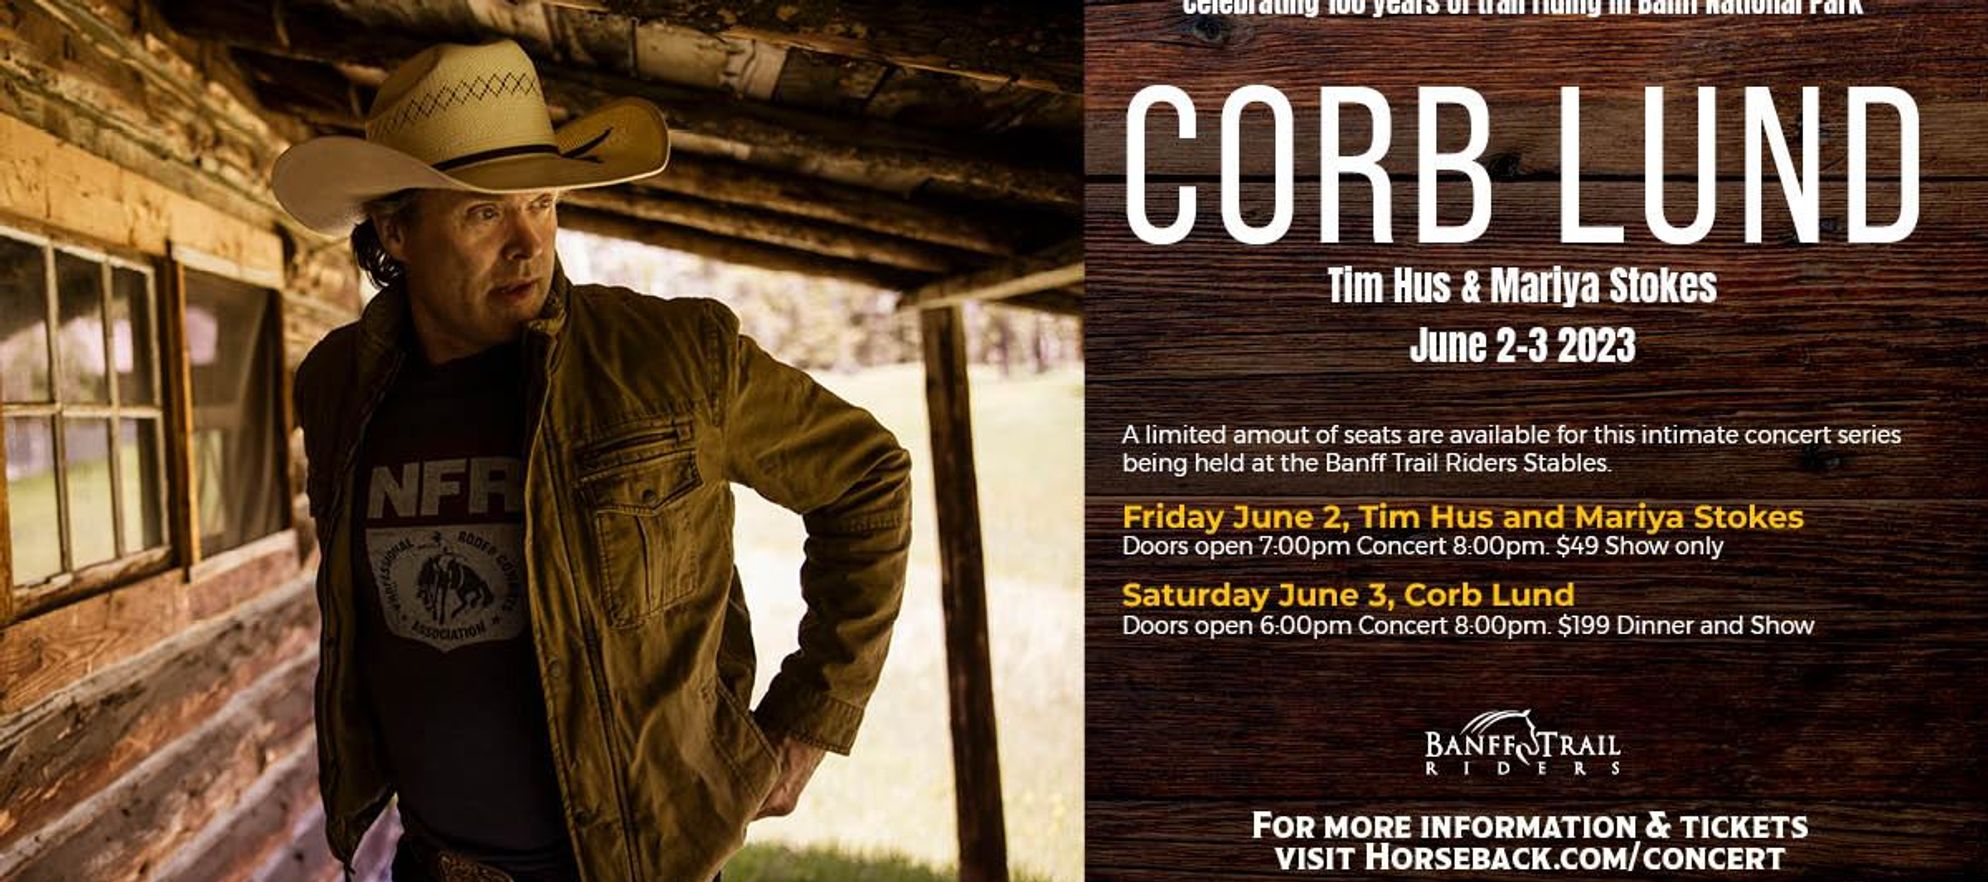 100 Years of Trail Riding in Banff National Park - Concert with Corb Lund 